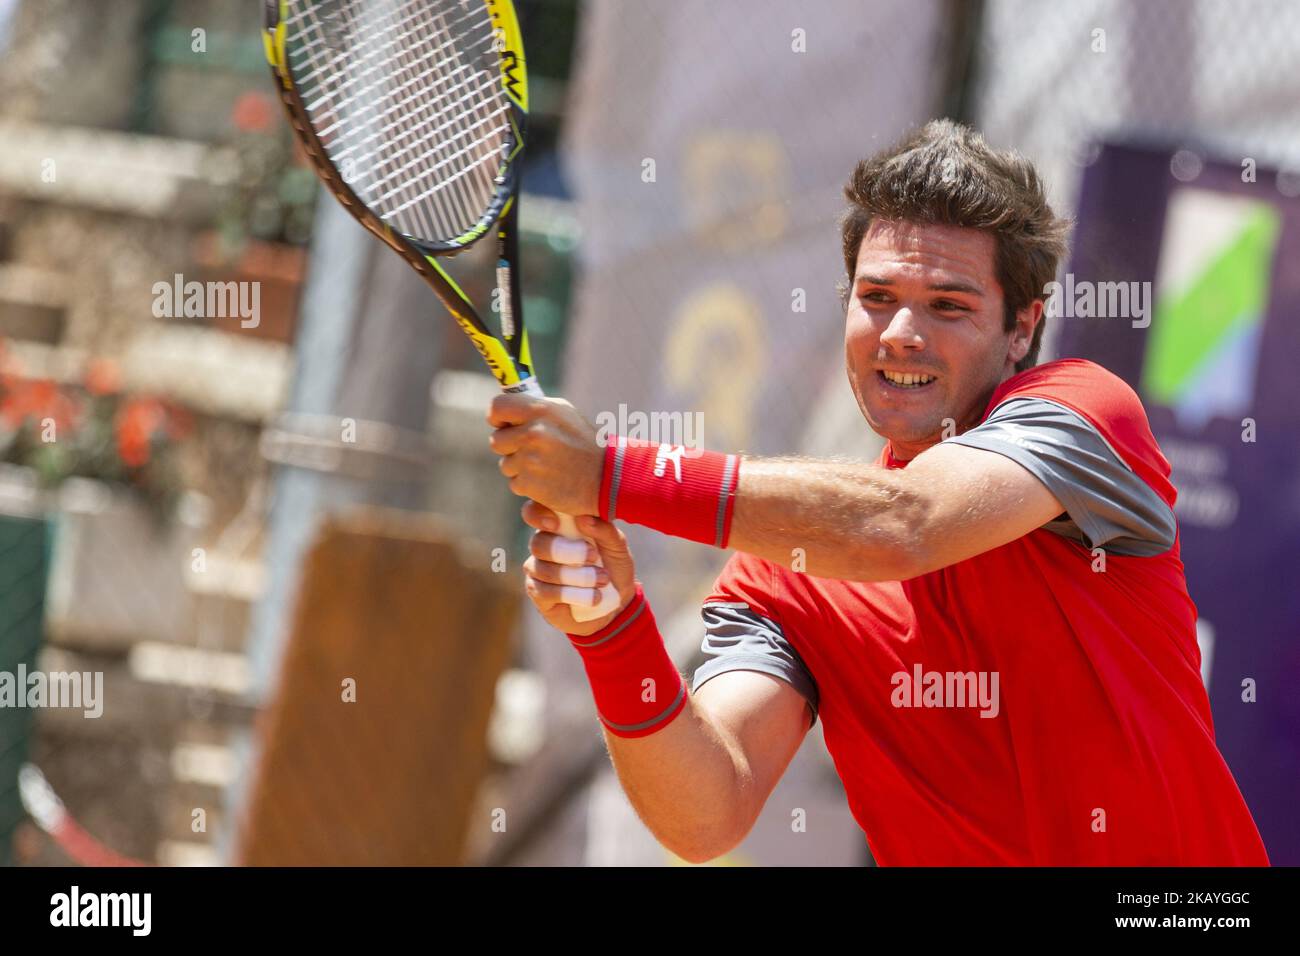 Carlos Boluda-Purkiss during match between Carlos Boluda-Purkiss (ESP) and  Paolo Lorenzi (ITA) during day 5 at the Internazionali di Tennis Città  dell'Aquila (ATP Challenger L'Aquila) in L'Aquila, Italy, on June 20, 2018.  (